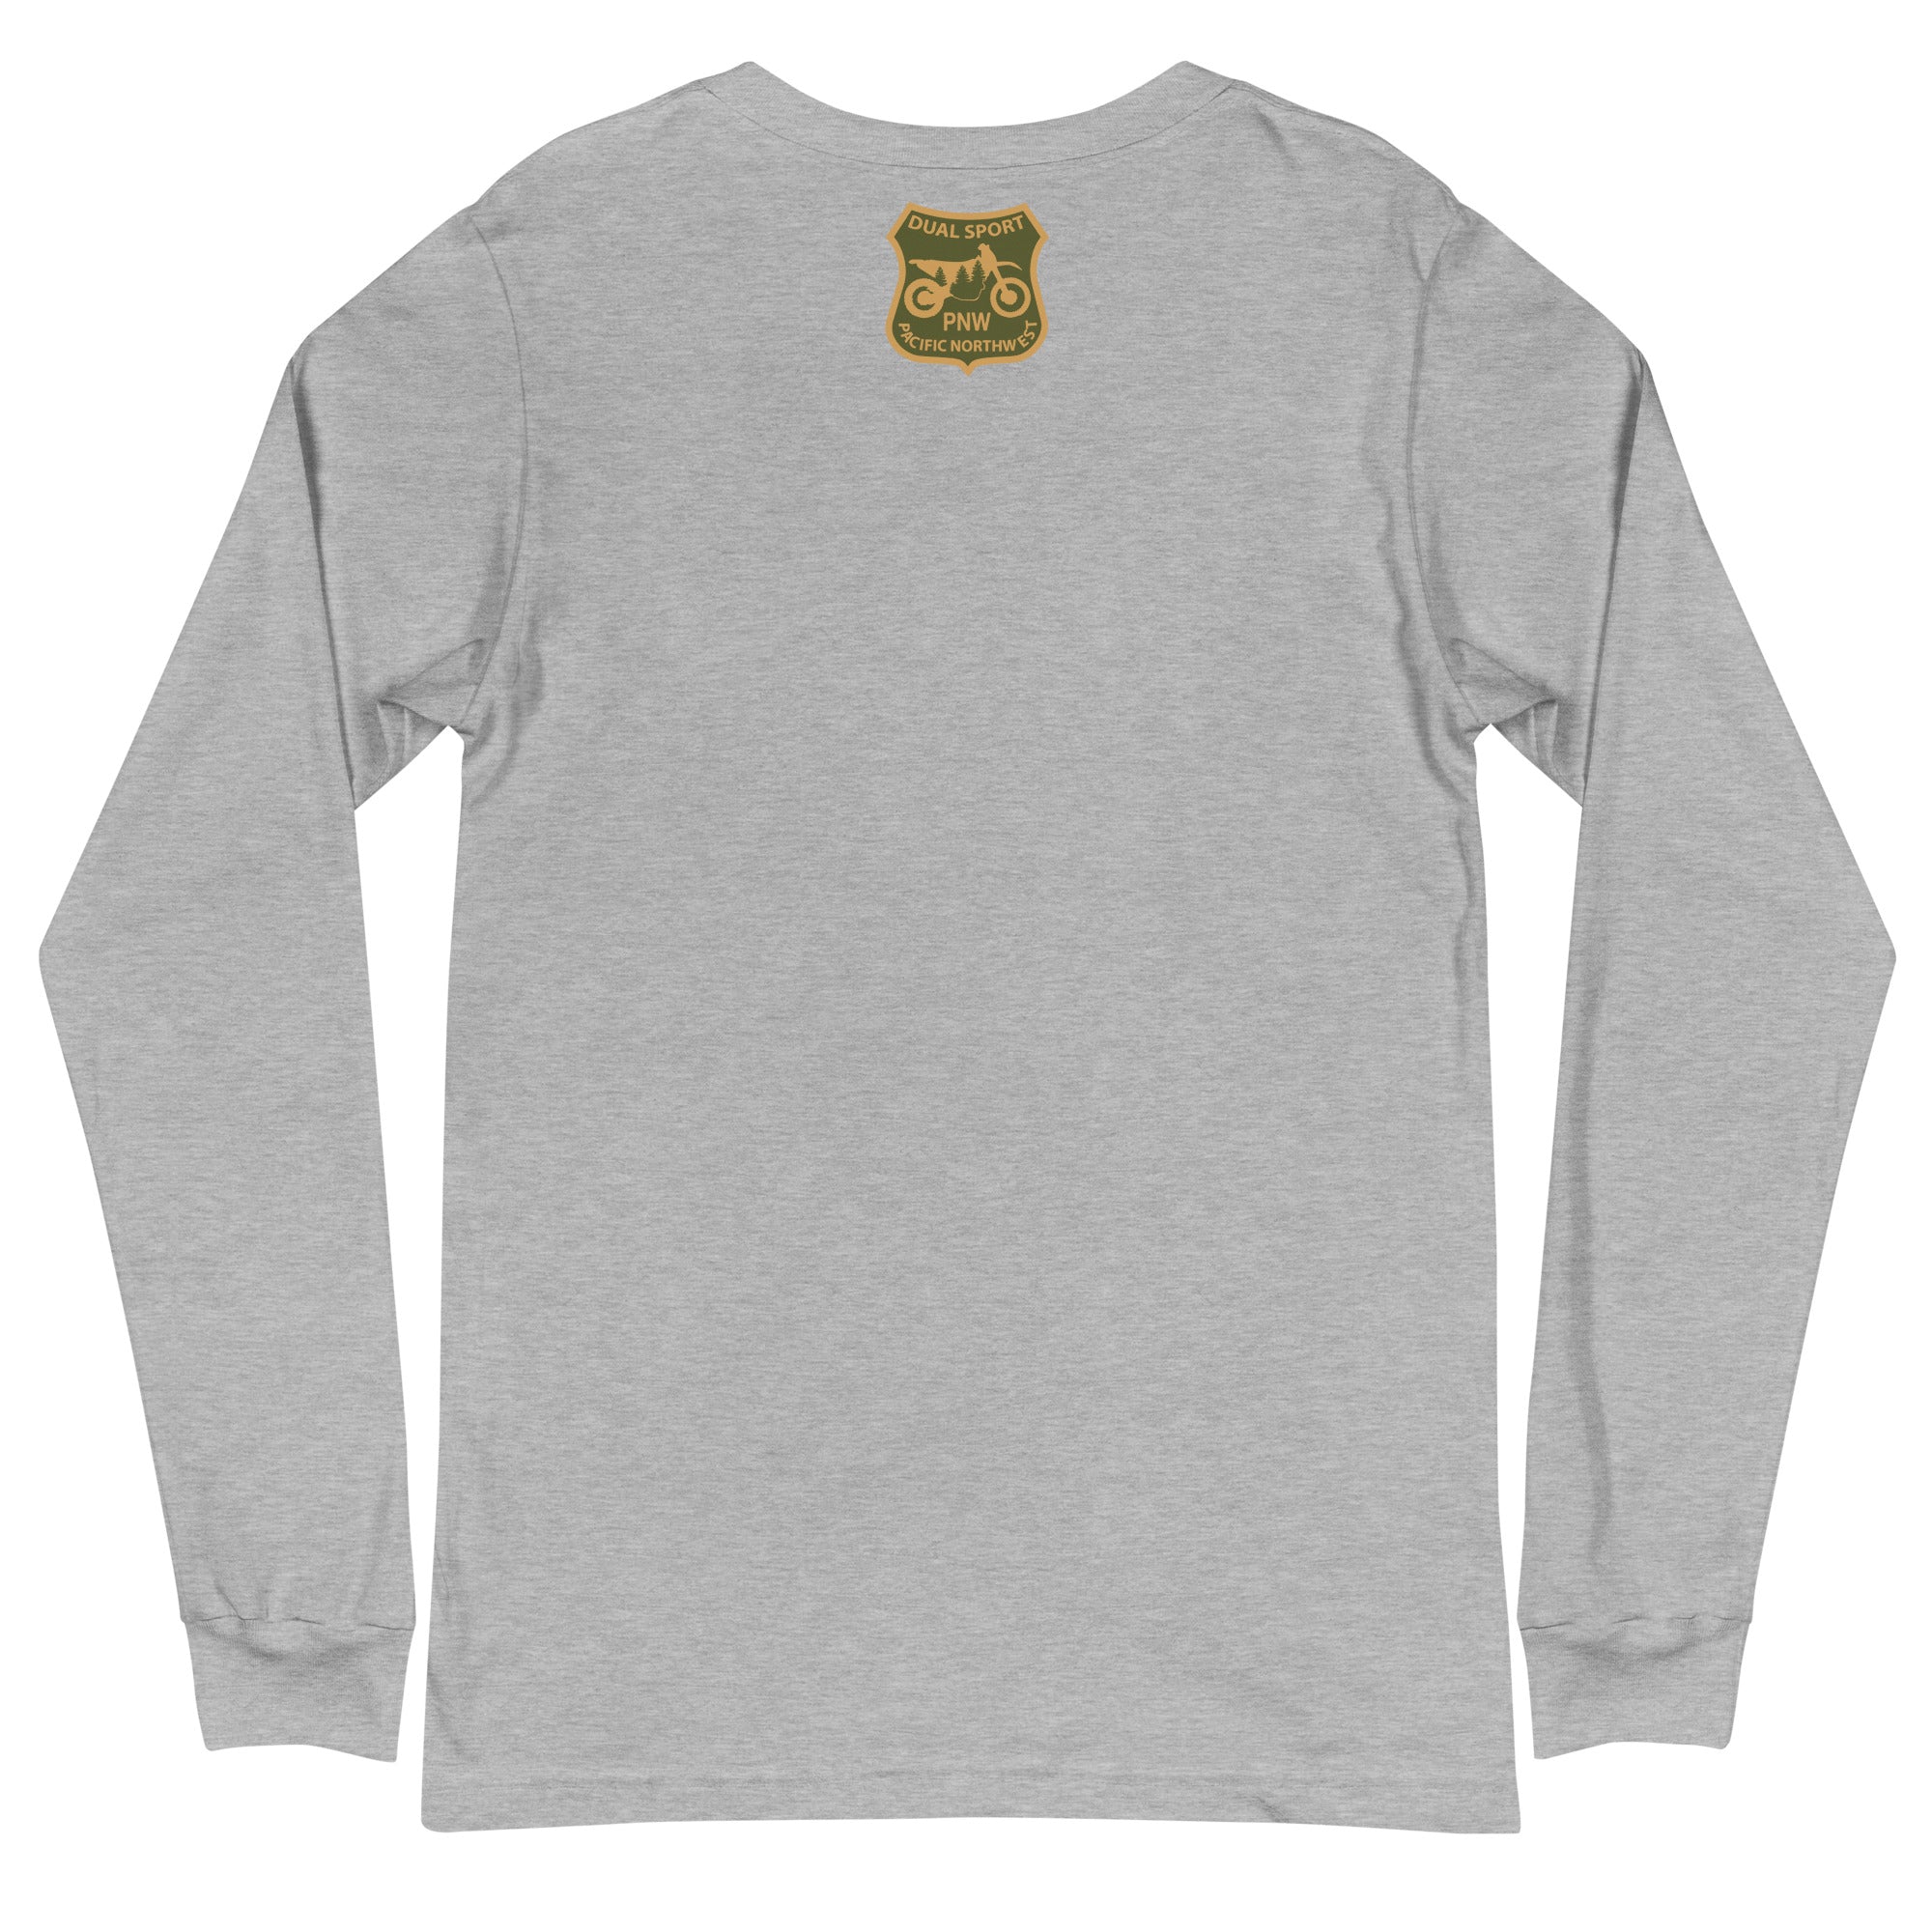 Share The Road Long Sleeve, Premium